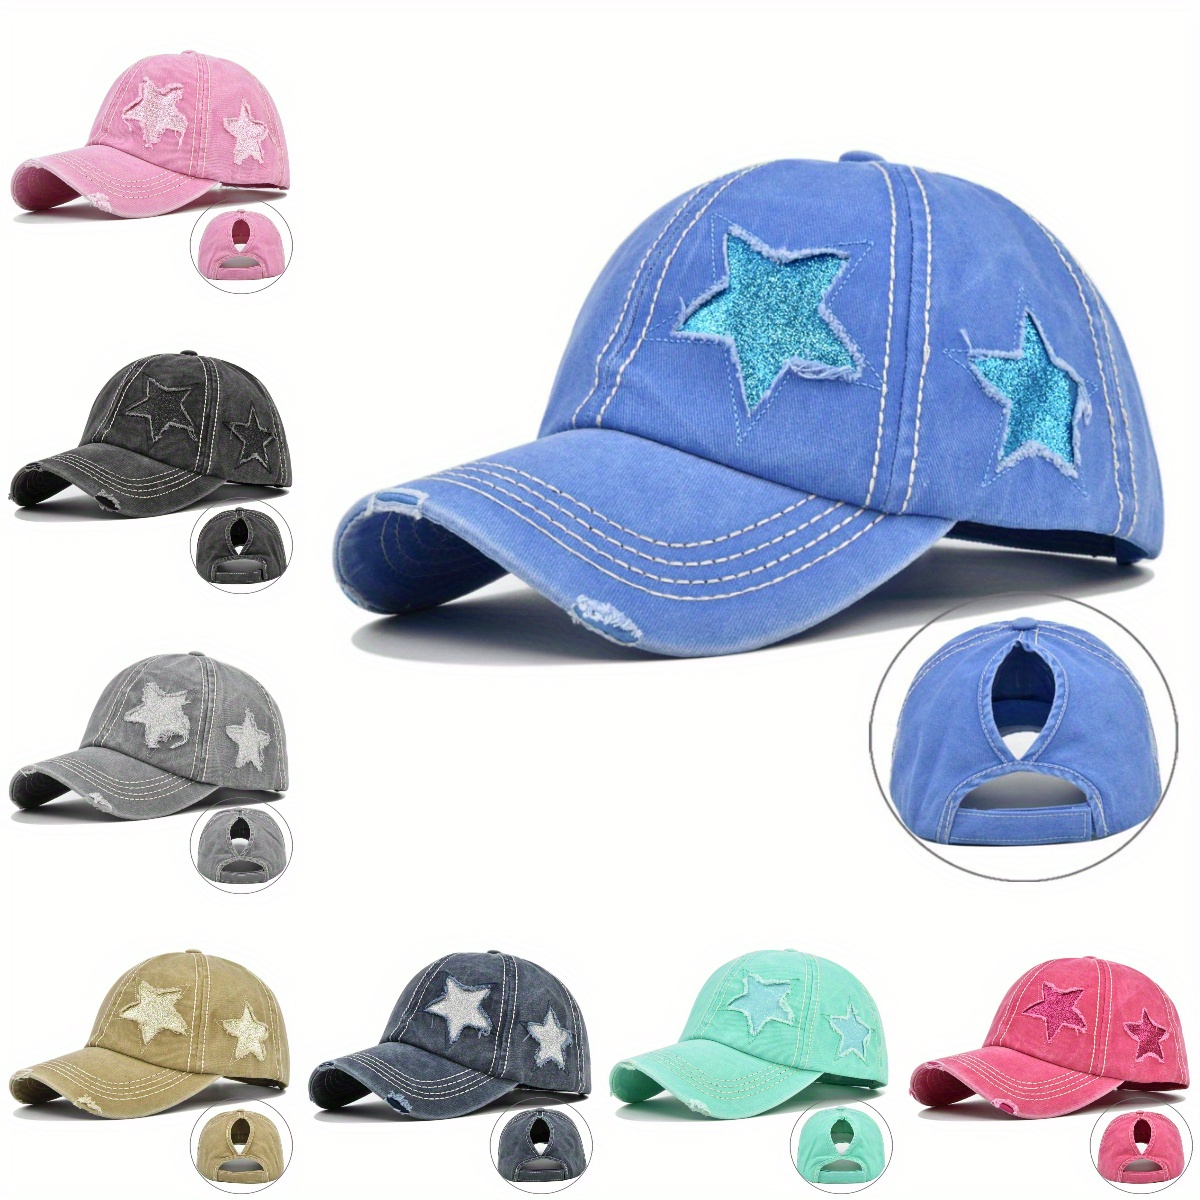 

Women's Distressed Washed Baseball Cap With Glitter Stars, Adjustable Ponytail Slot, Stylish Sun Protection Peaked Hat For Outdoor Cycling And Hiking Gifts For Eid